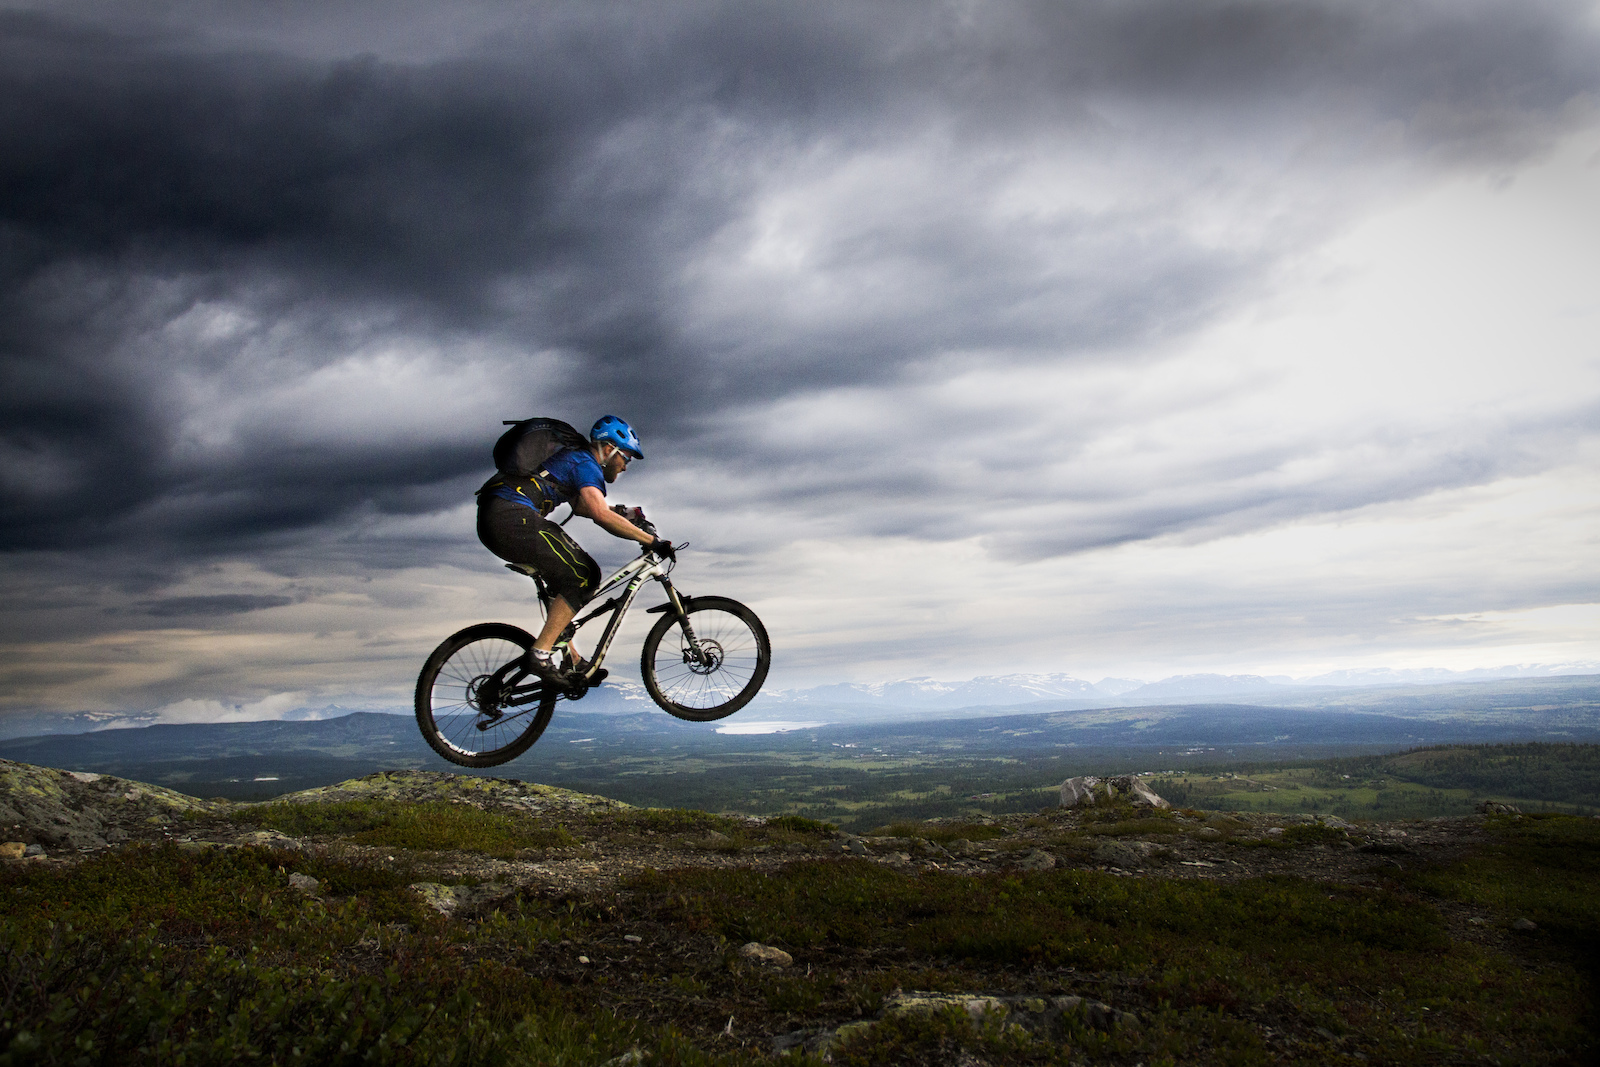 Evening big mountain ride at Stavadalen in Norway, lucky with the dramatic scenery.